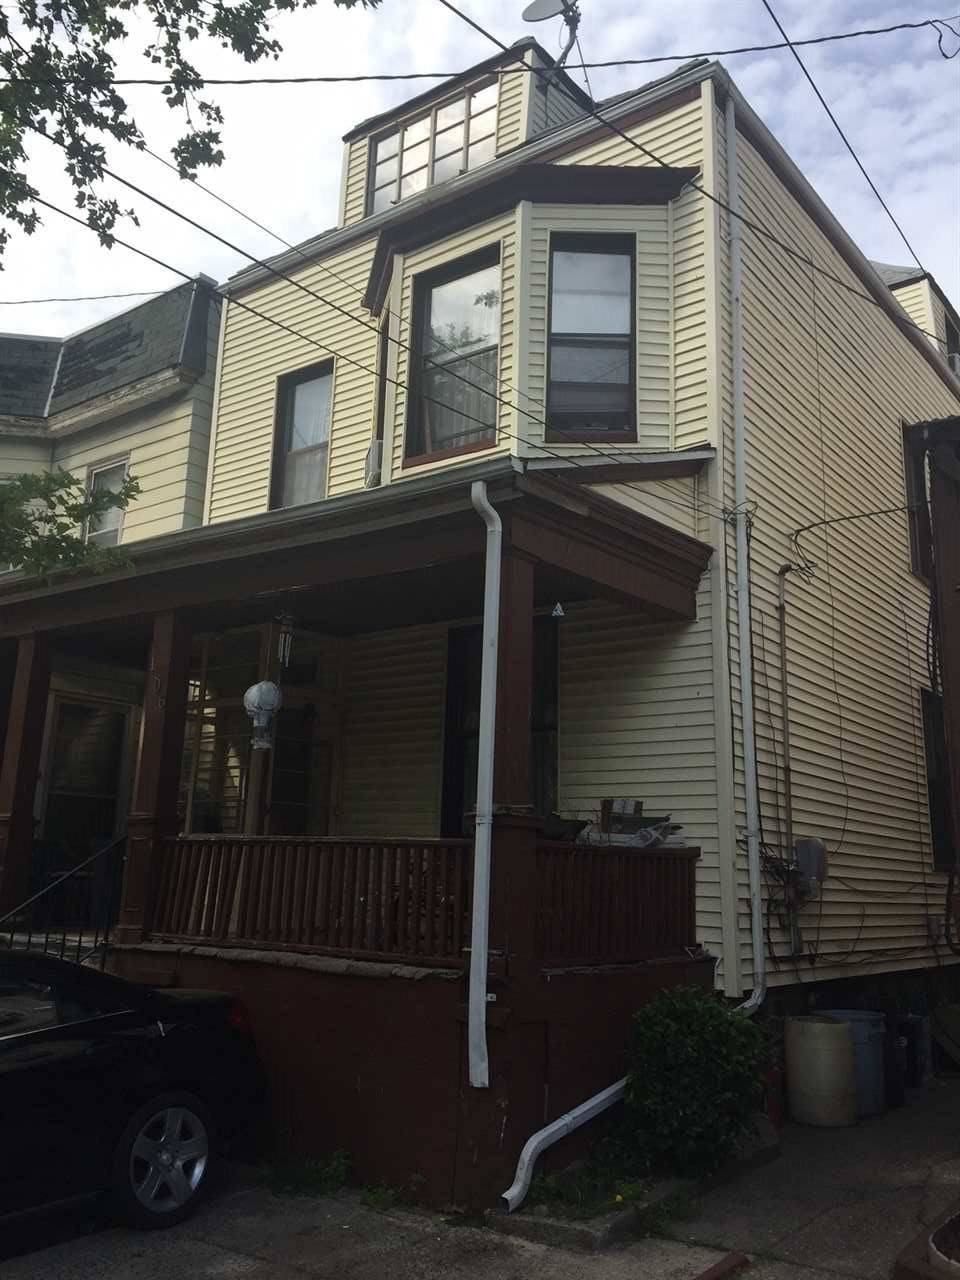 Charming 1 Family house in a great neighborhood - 4 BR New Jersey